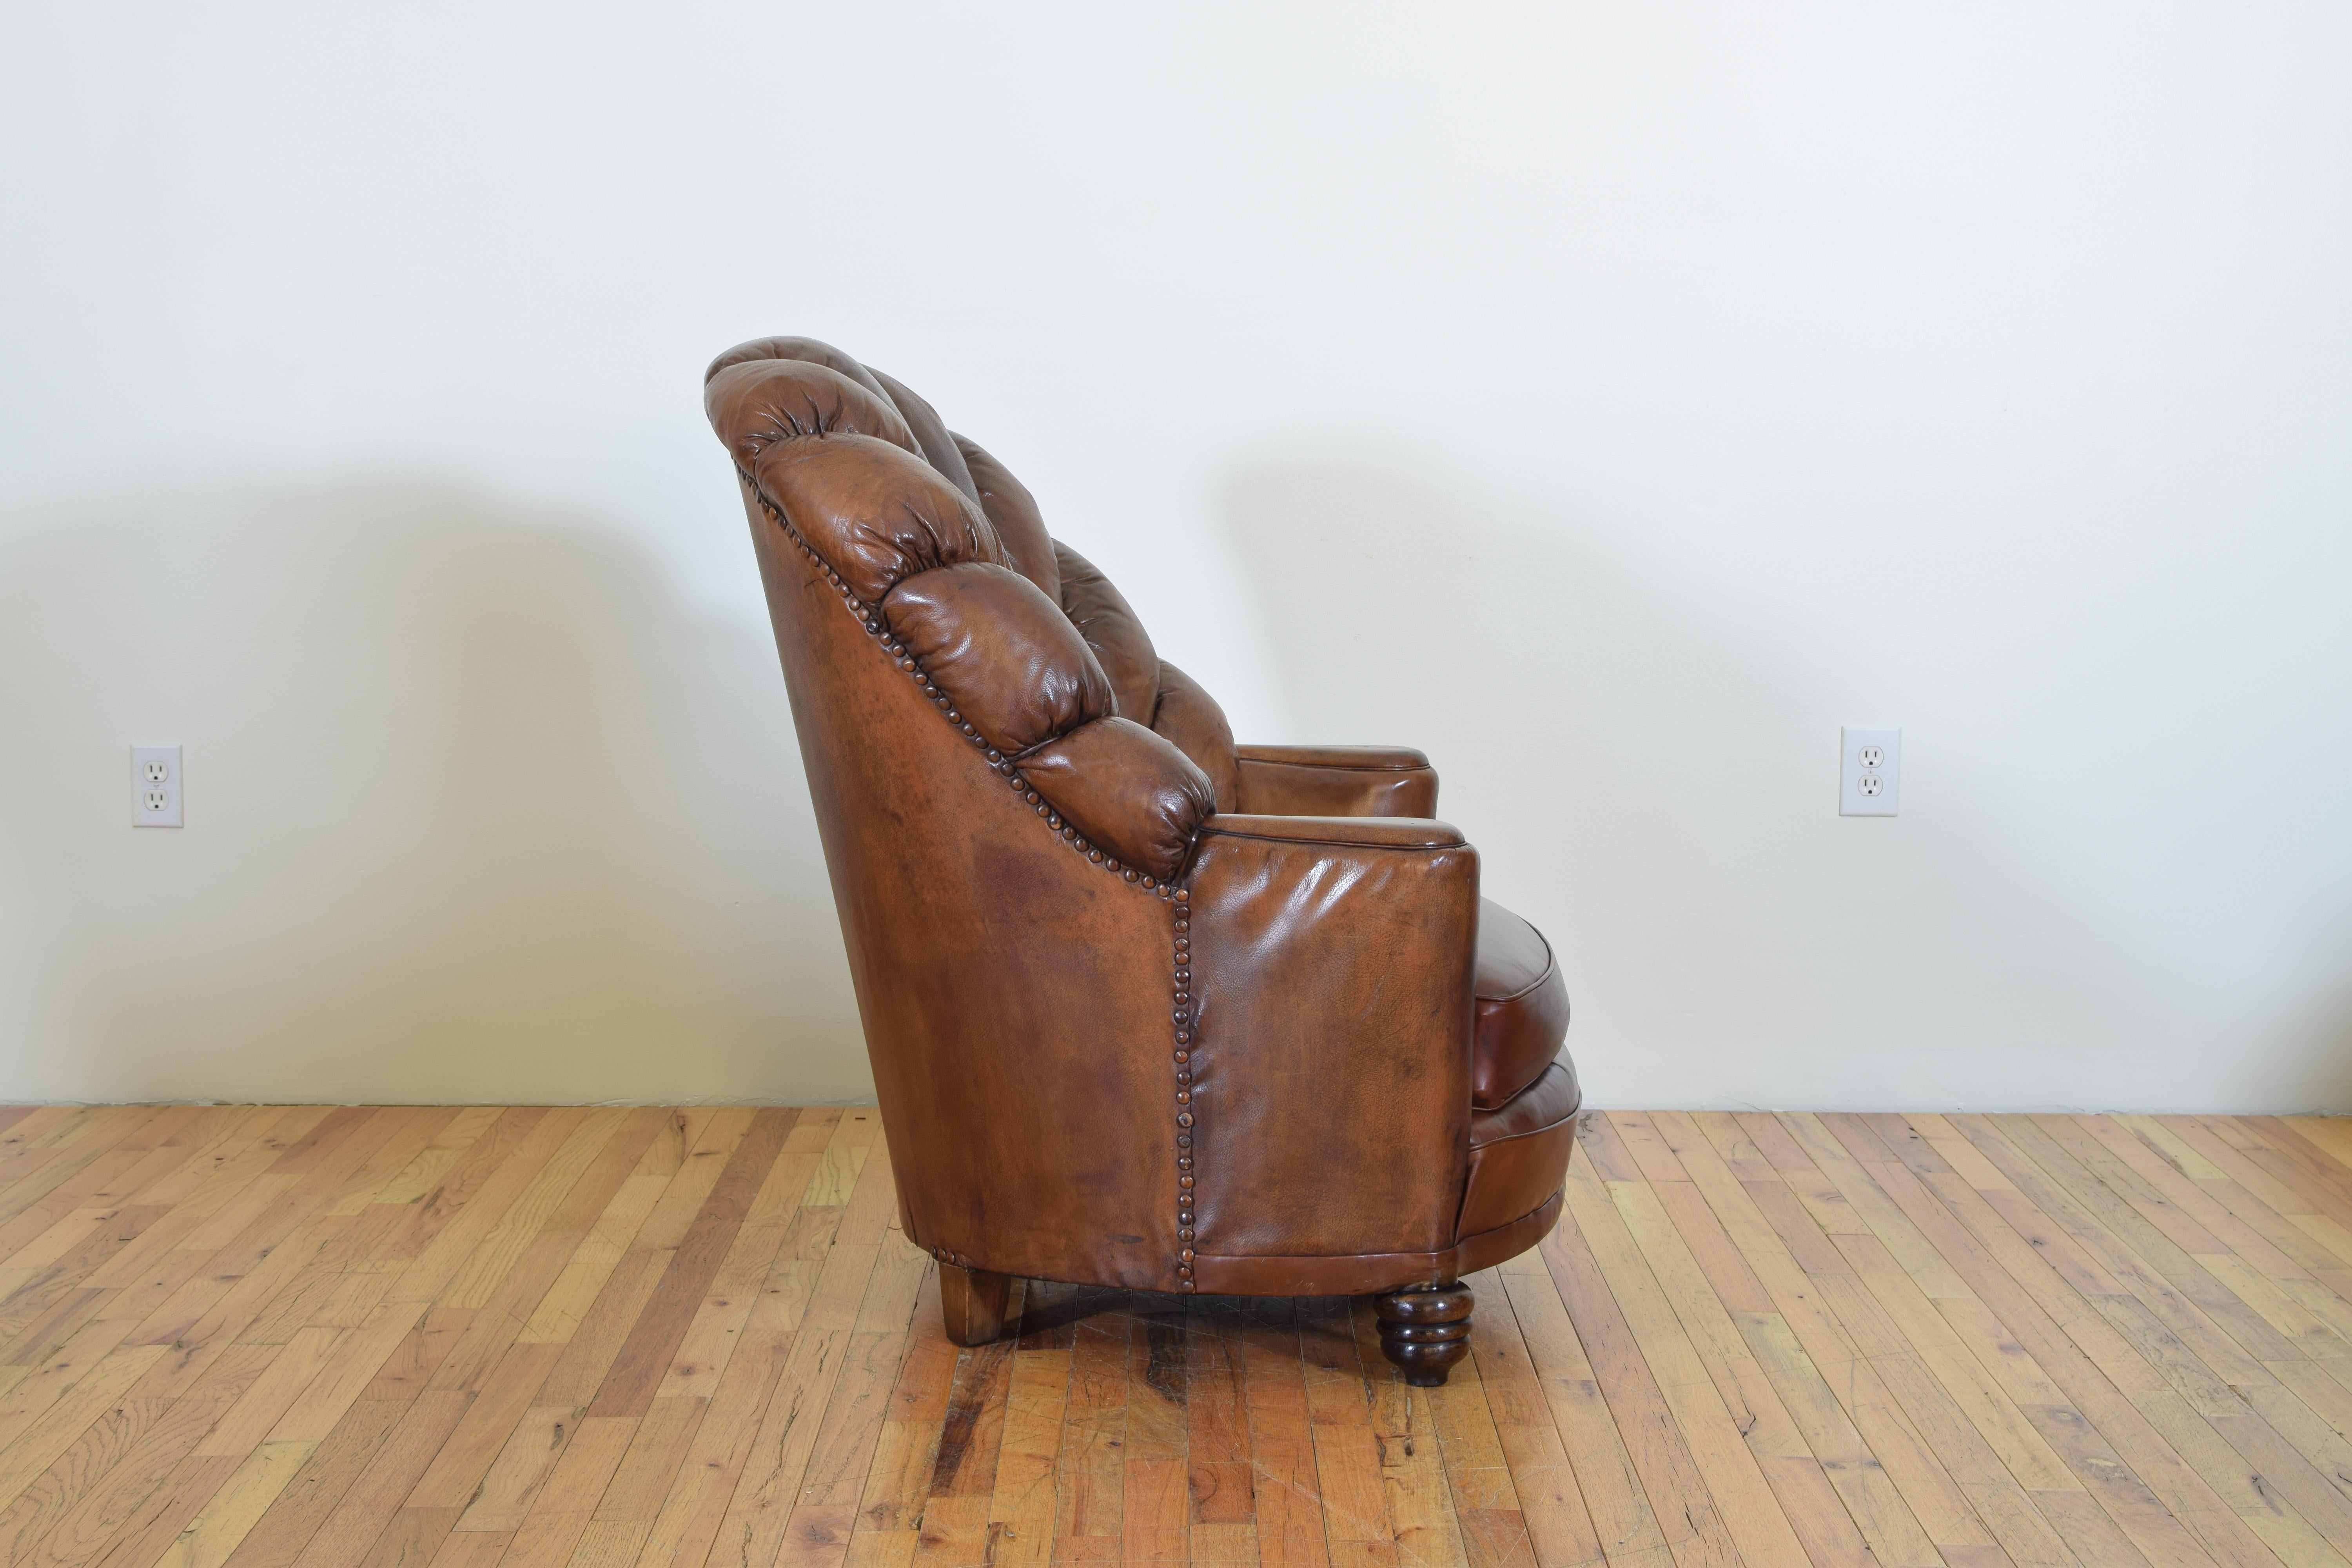 Mid-20th Century French Art Deco Leather Upholstered Club Chair, Second Quarter of 20th Century